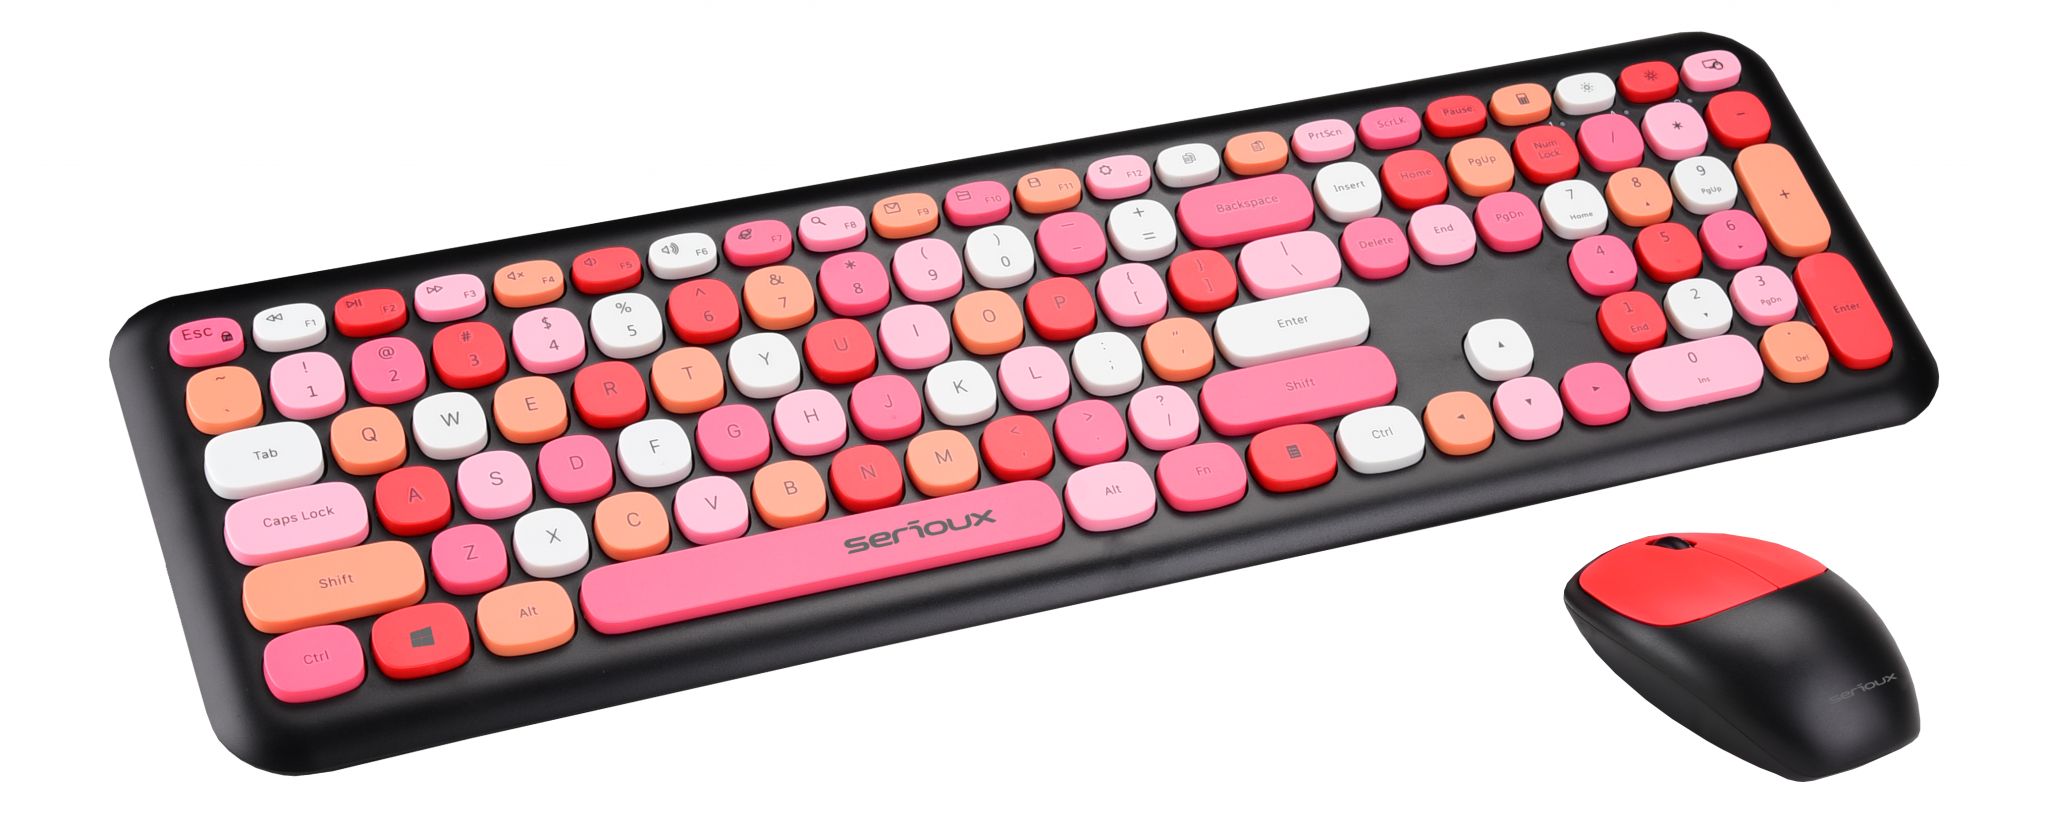 Kit tastatura + mouse Serioux Colourful 9920RD, wireless 2.4GHz, US layout, multimedia, mouse optic 1200dpi, USB, nano receiver, rosu_1